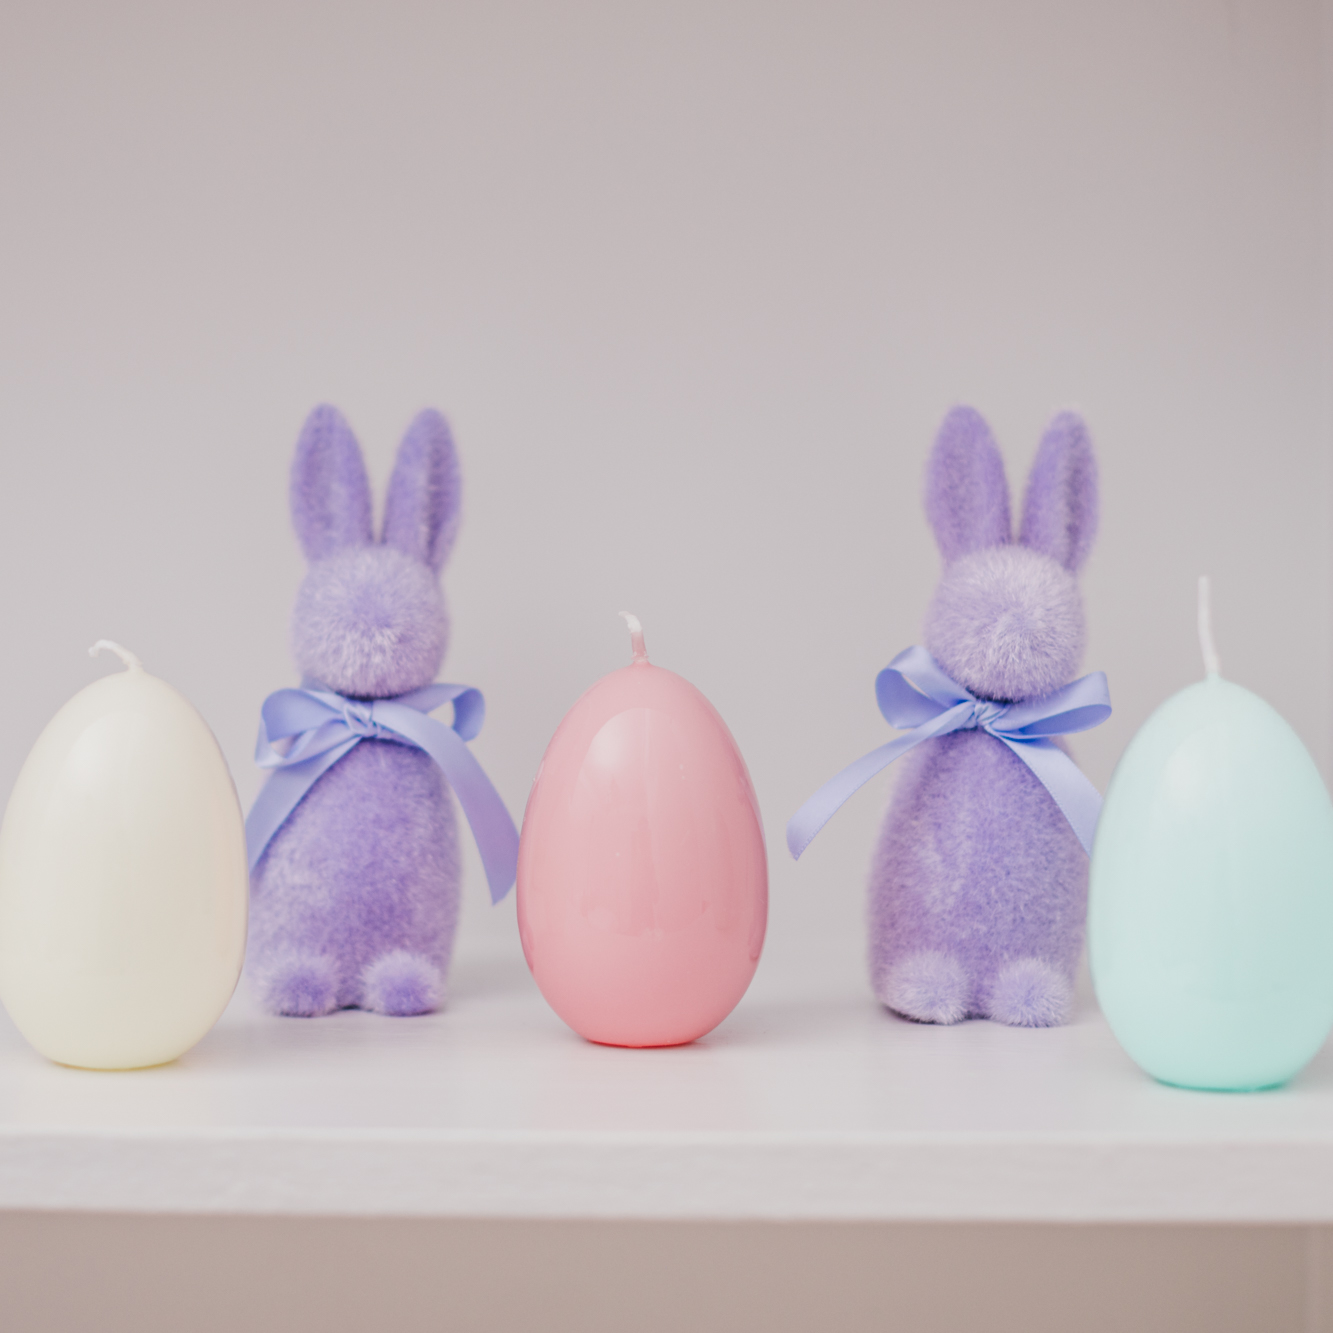 Pastel Egg Glossy Candle Trio